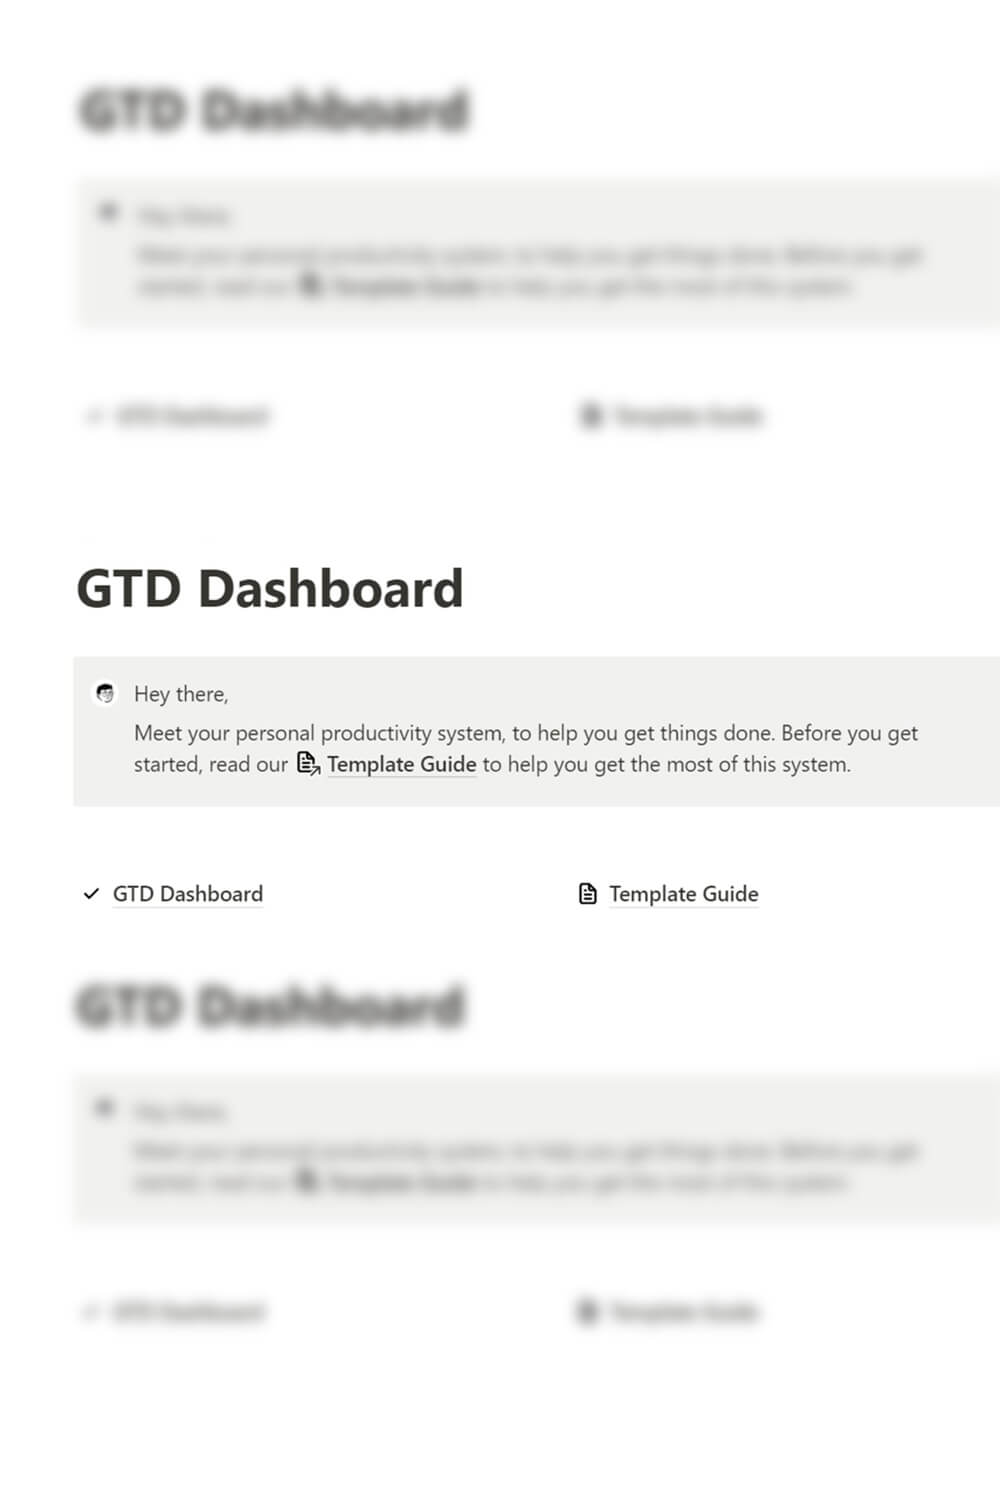 GTD Dashboard, Inscription: Hey, there, Meet your personal productivity system.